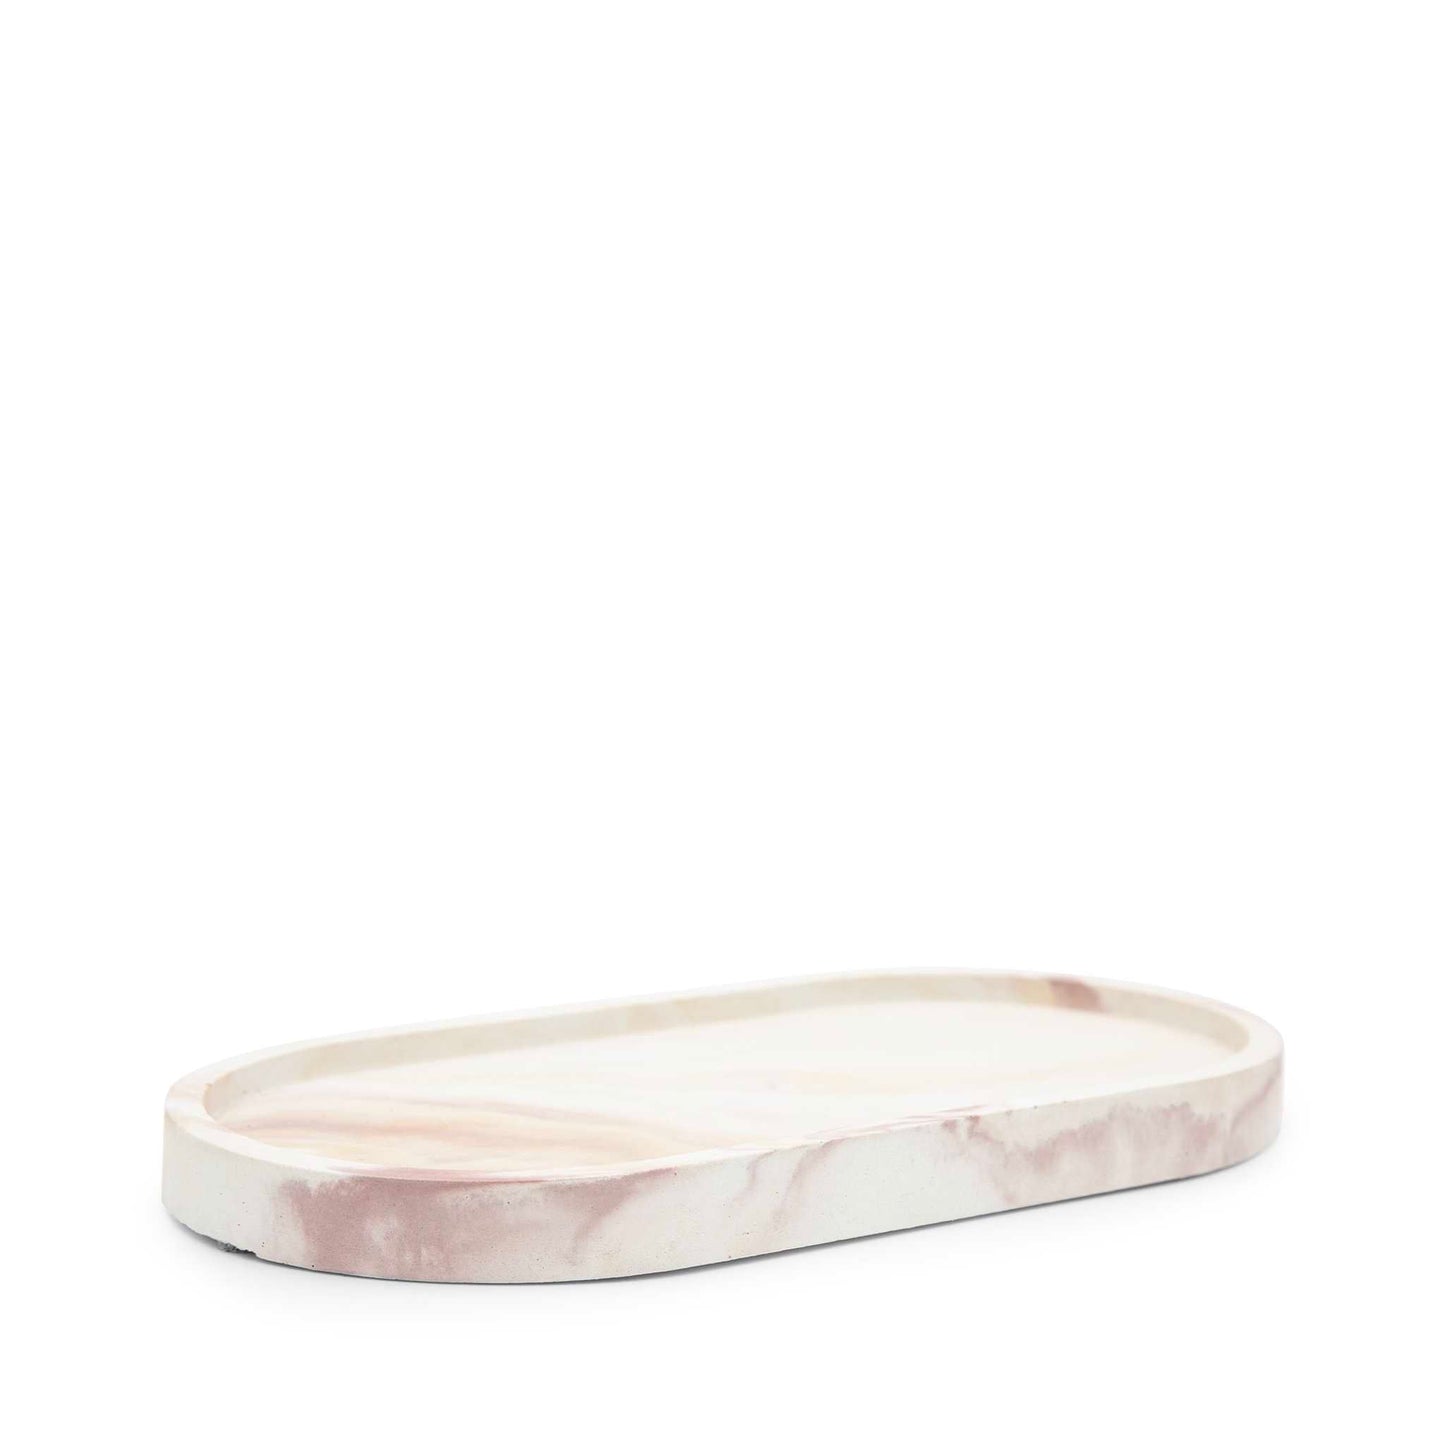 Faerly Homewares Concrete Oval Decorative Tray  - Peachy Marble